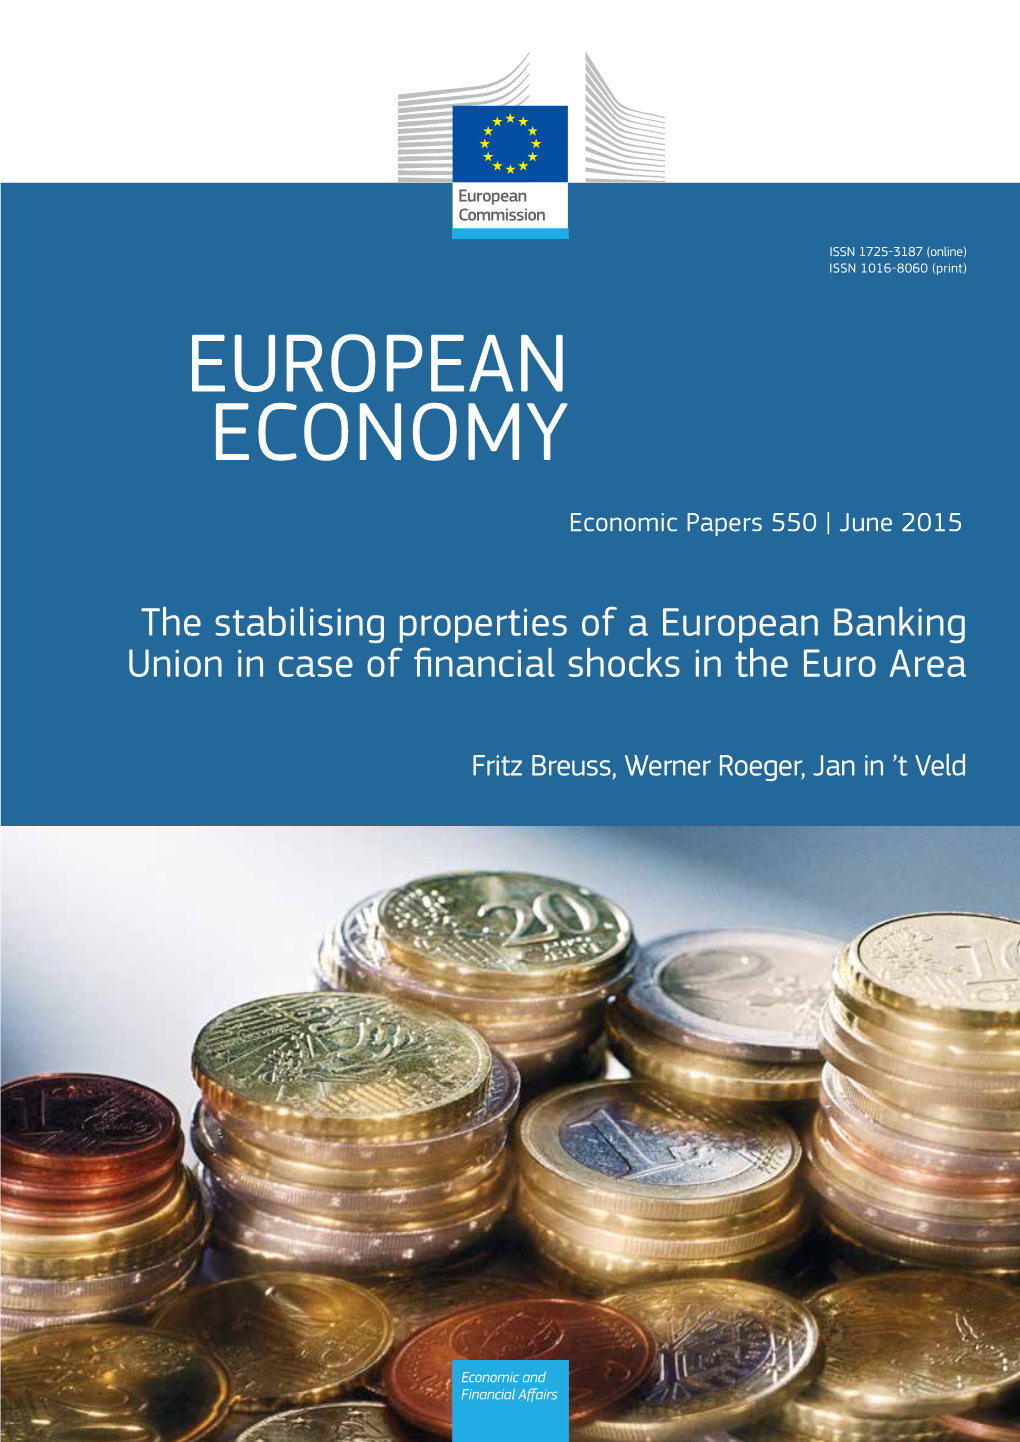 The Stabilising Properties of a European Banking Union in Case of Financial Shocks in the Euro Area